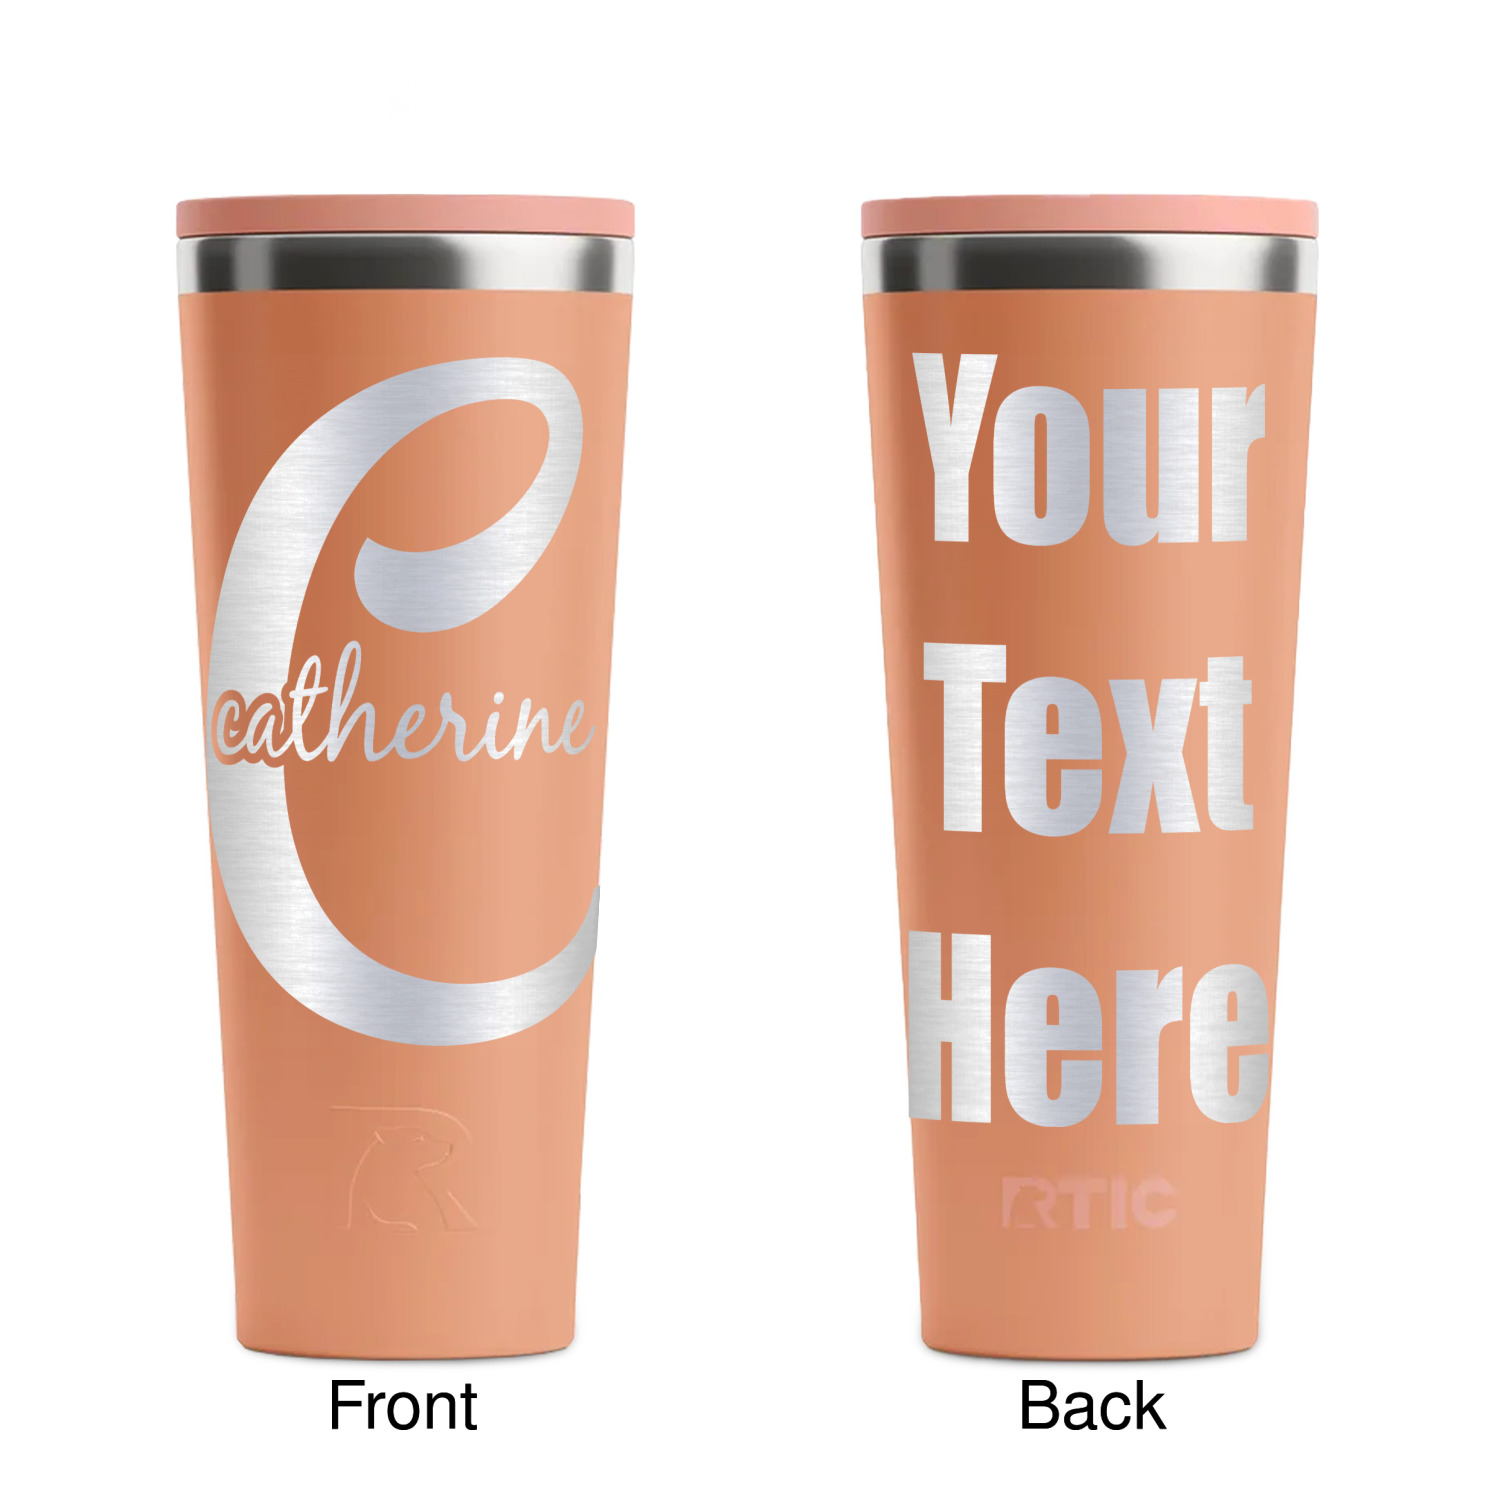 https://www.youcustomizeit.com/common/MAKE/837763/Name-Initial-Girly-Peach-RTIC-Everyday-Tumbler-28-oz-Front-and-Back.jpg?lm=1698259164